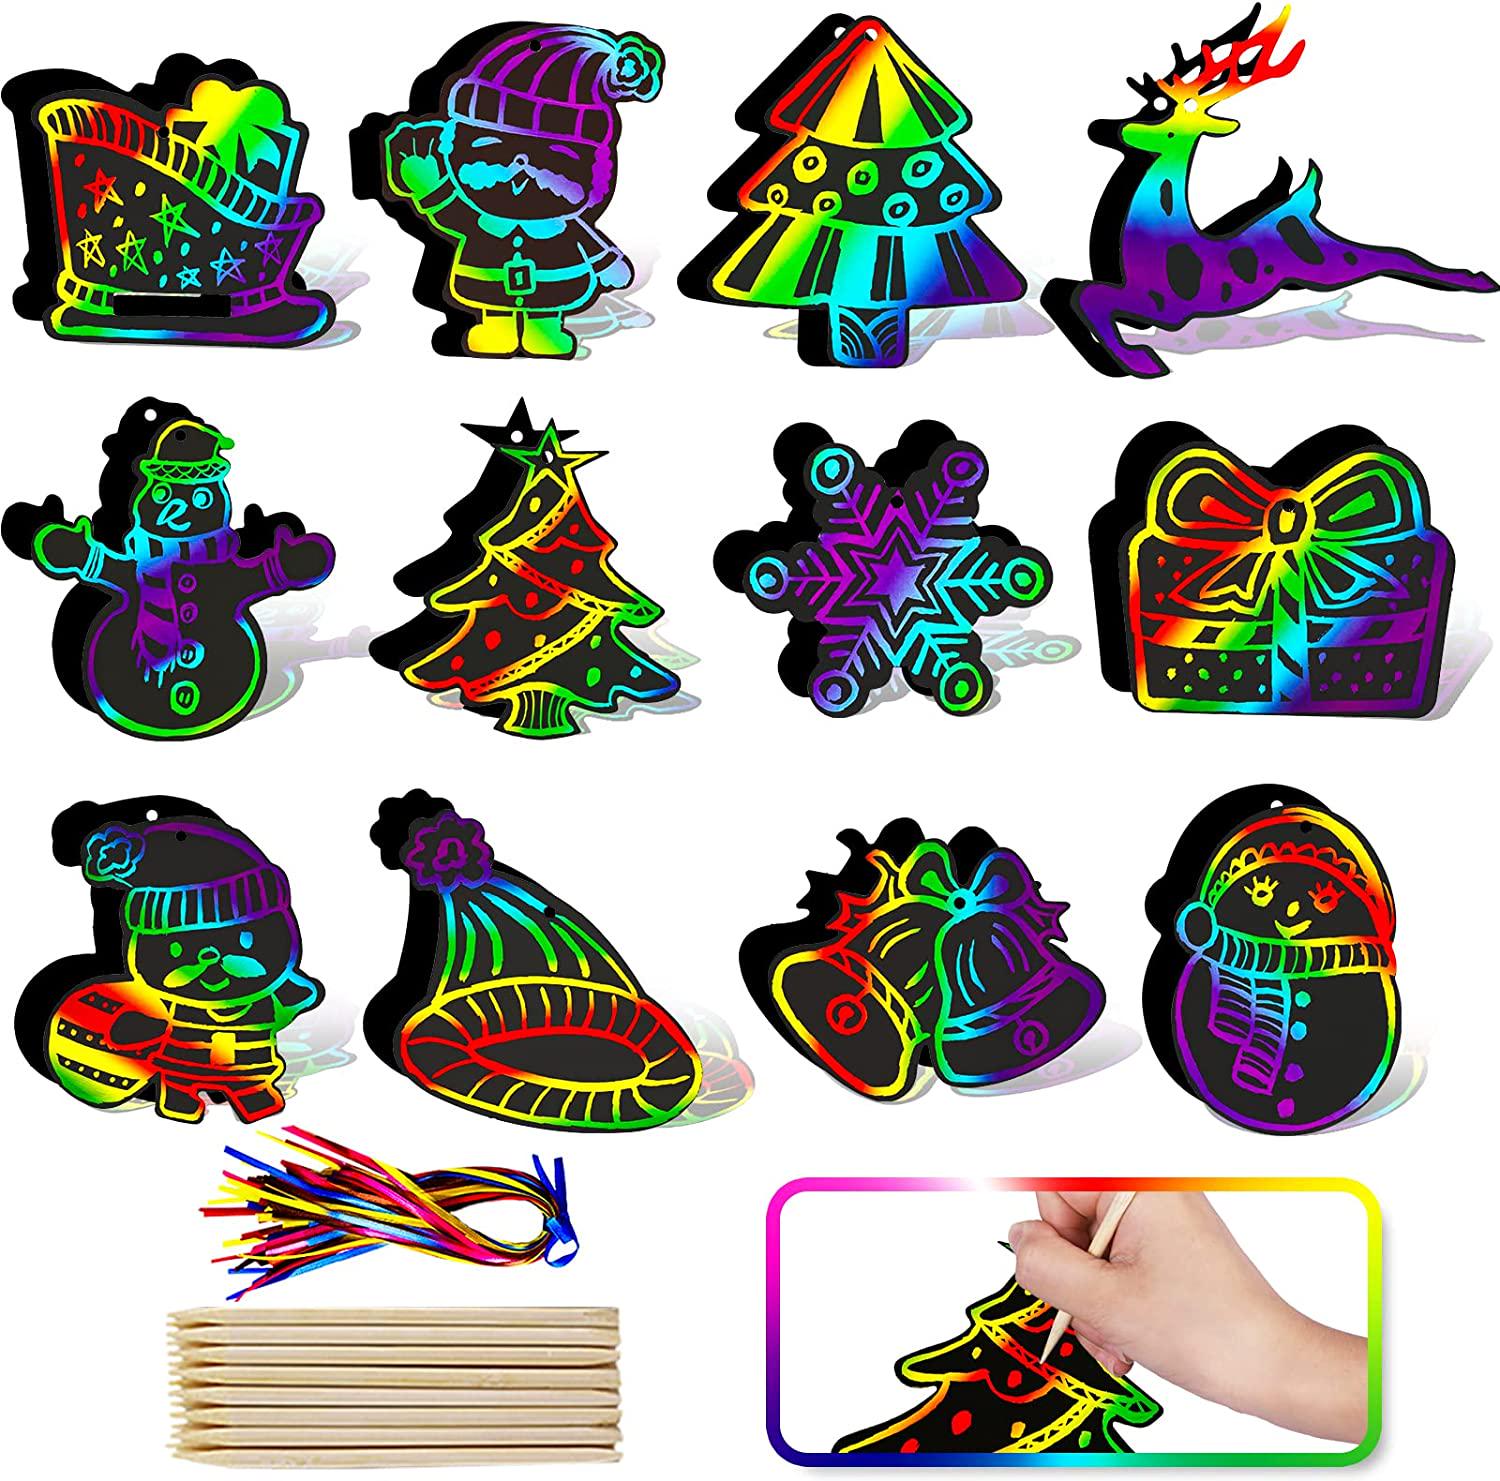 Max Fun, Max Fun Rainbow Color Scratch Christmas Ornaments (96 Counts) - Magic Scratch Off Cards Paper Hanging Art Craft Supplies Educational Toys Kit with 48 PCS Drawing Sticks and 96 Cords for Kid Party Favor